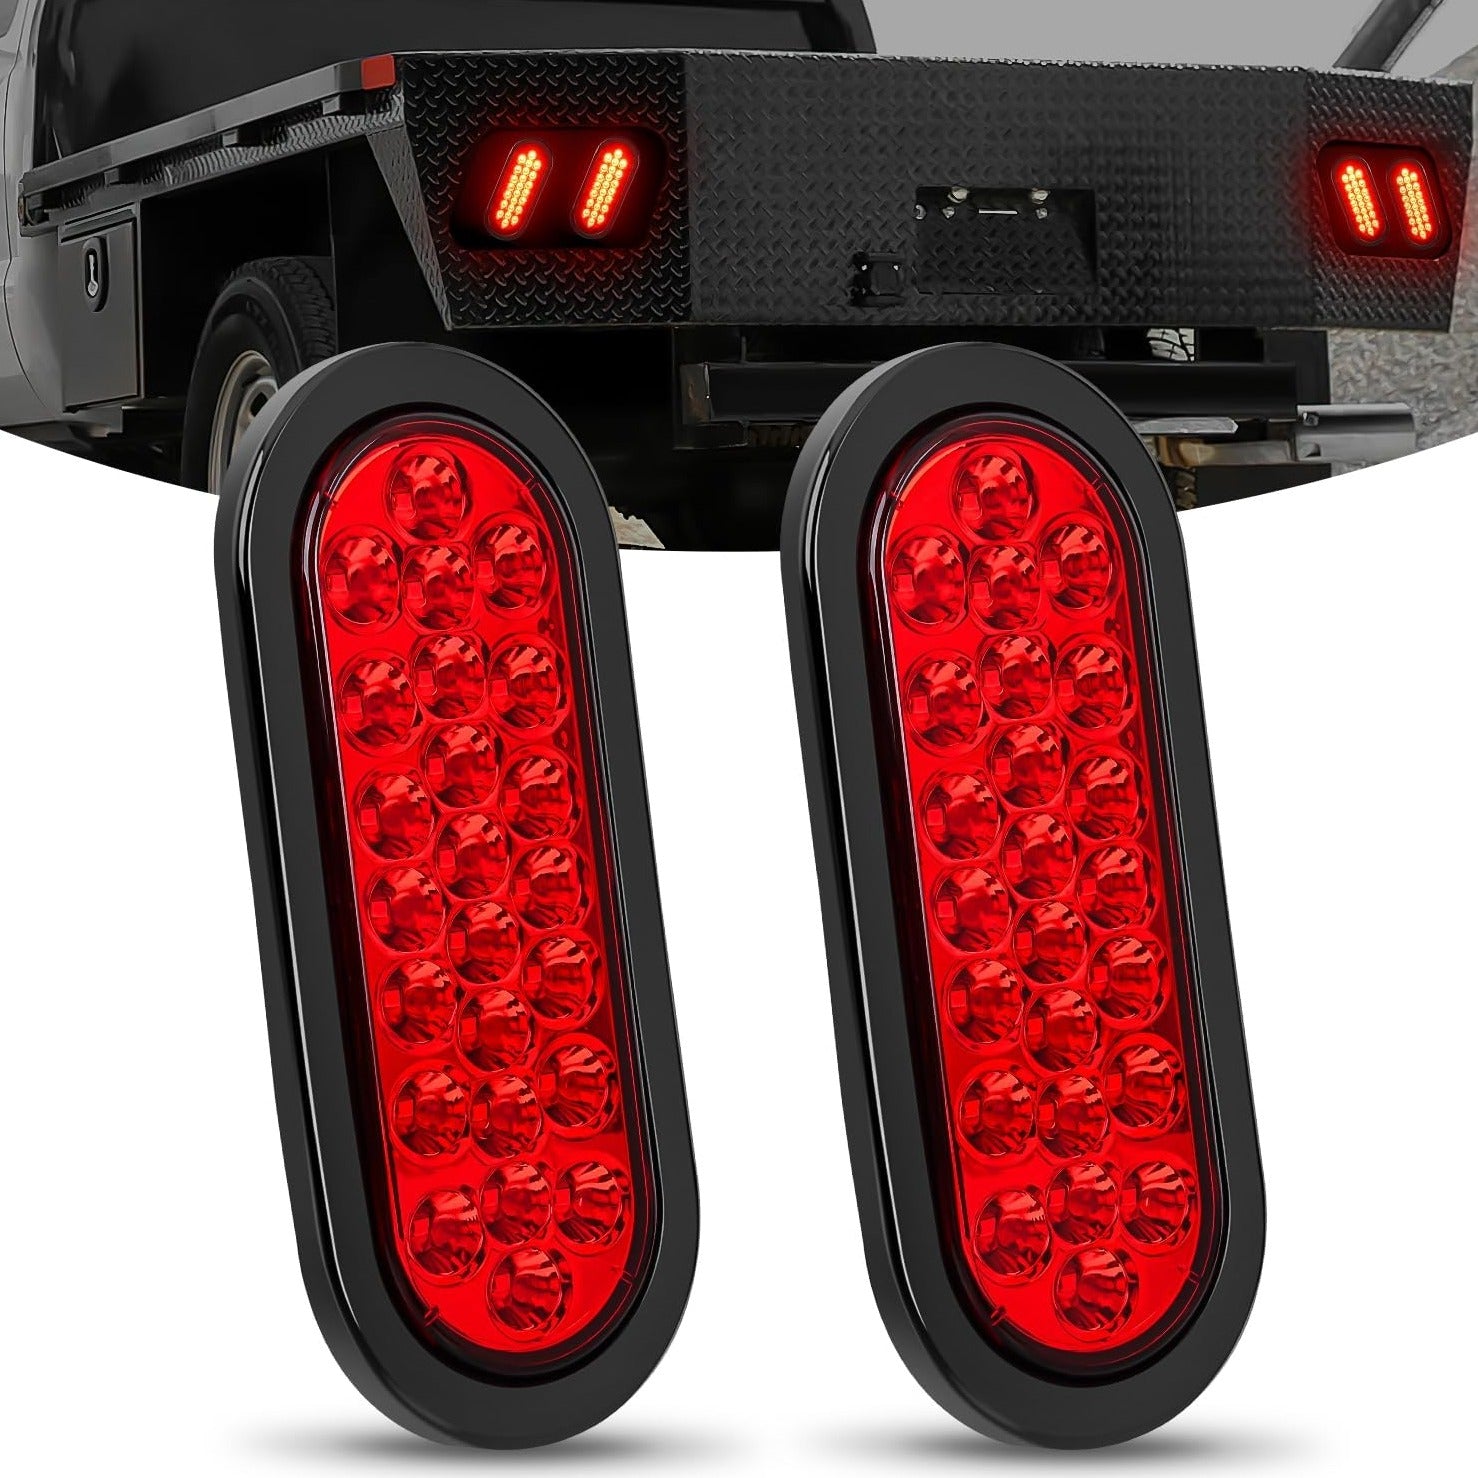 6" Oval Red 24Leds Trailer Tail Lights (Pair) Nilight